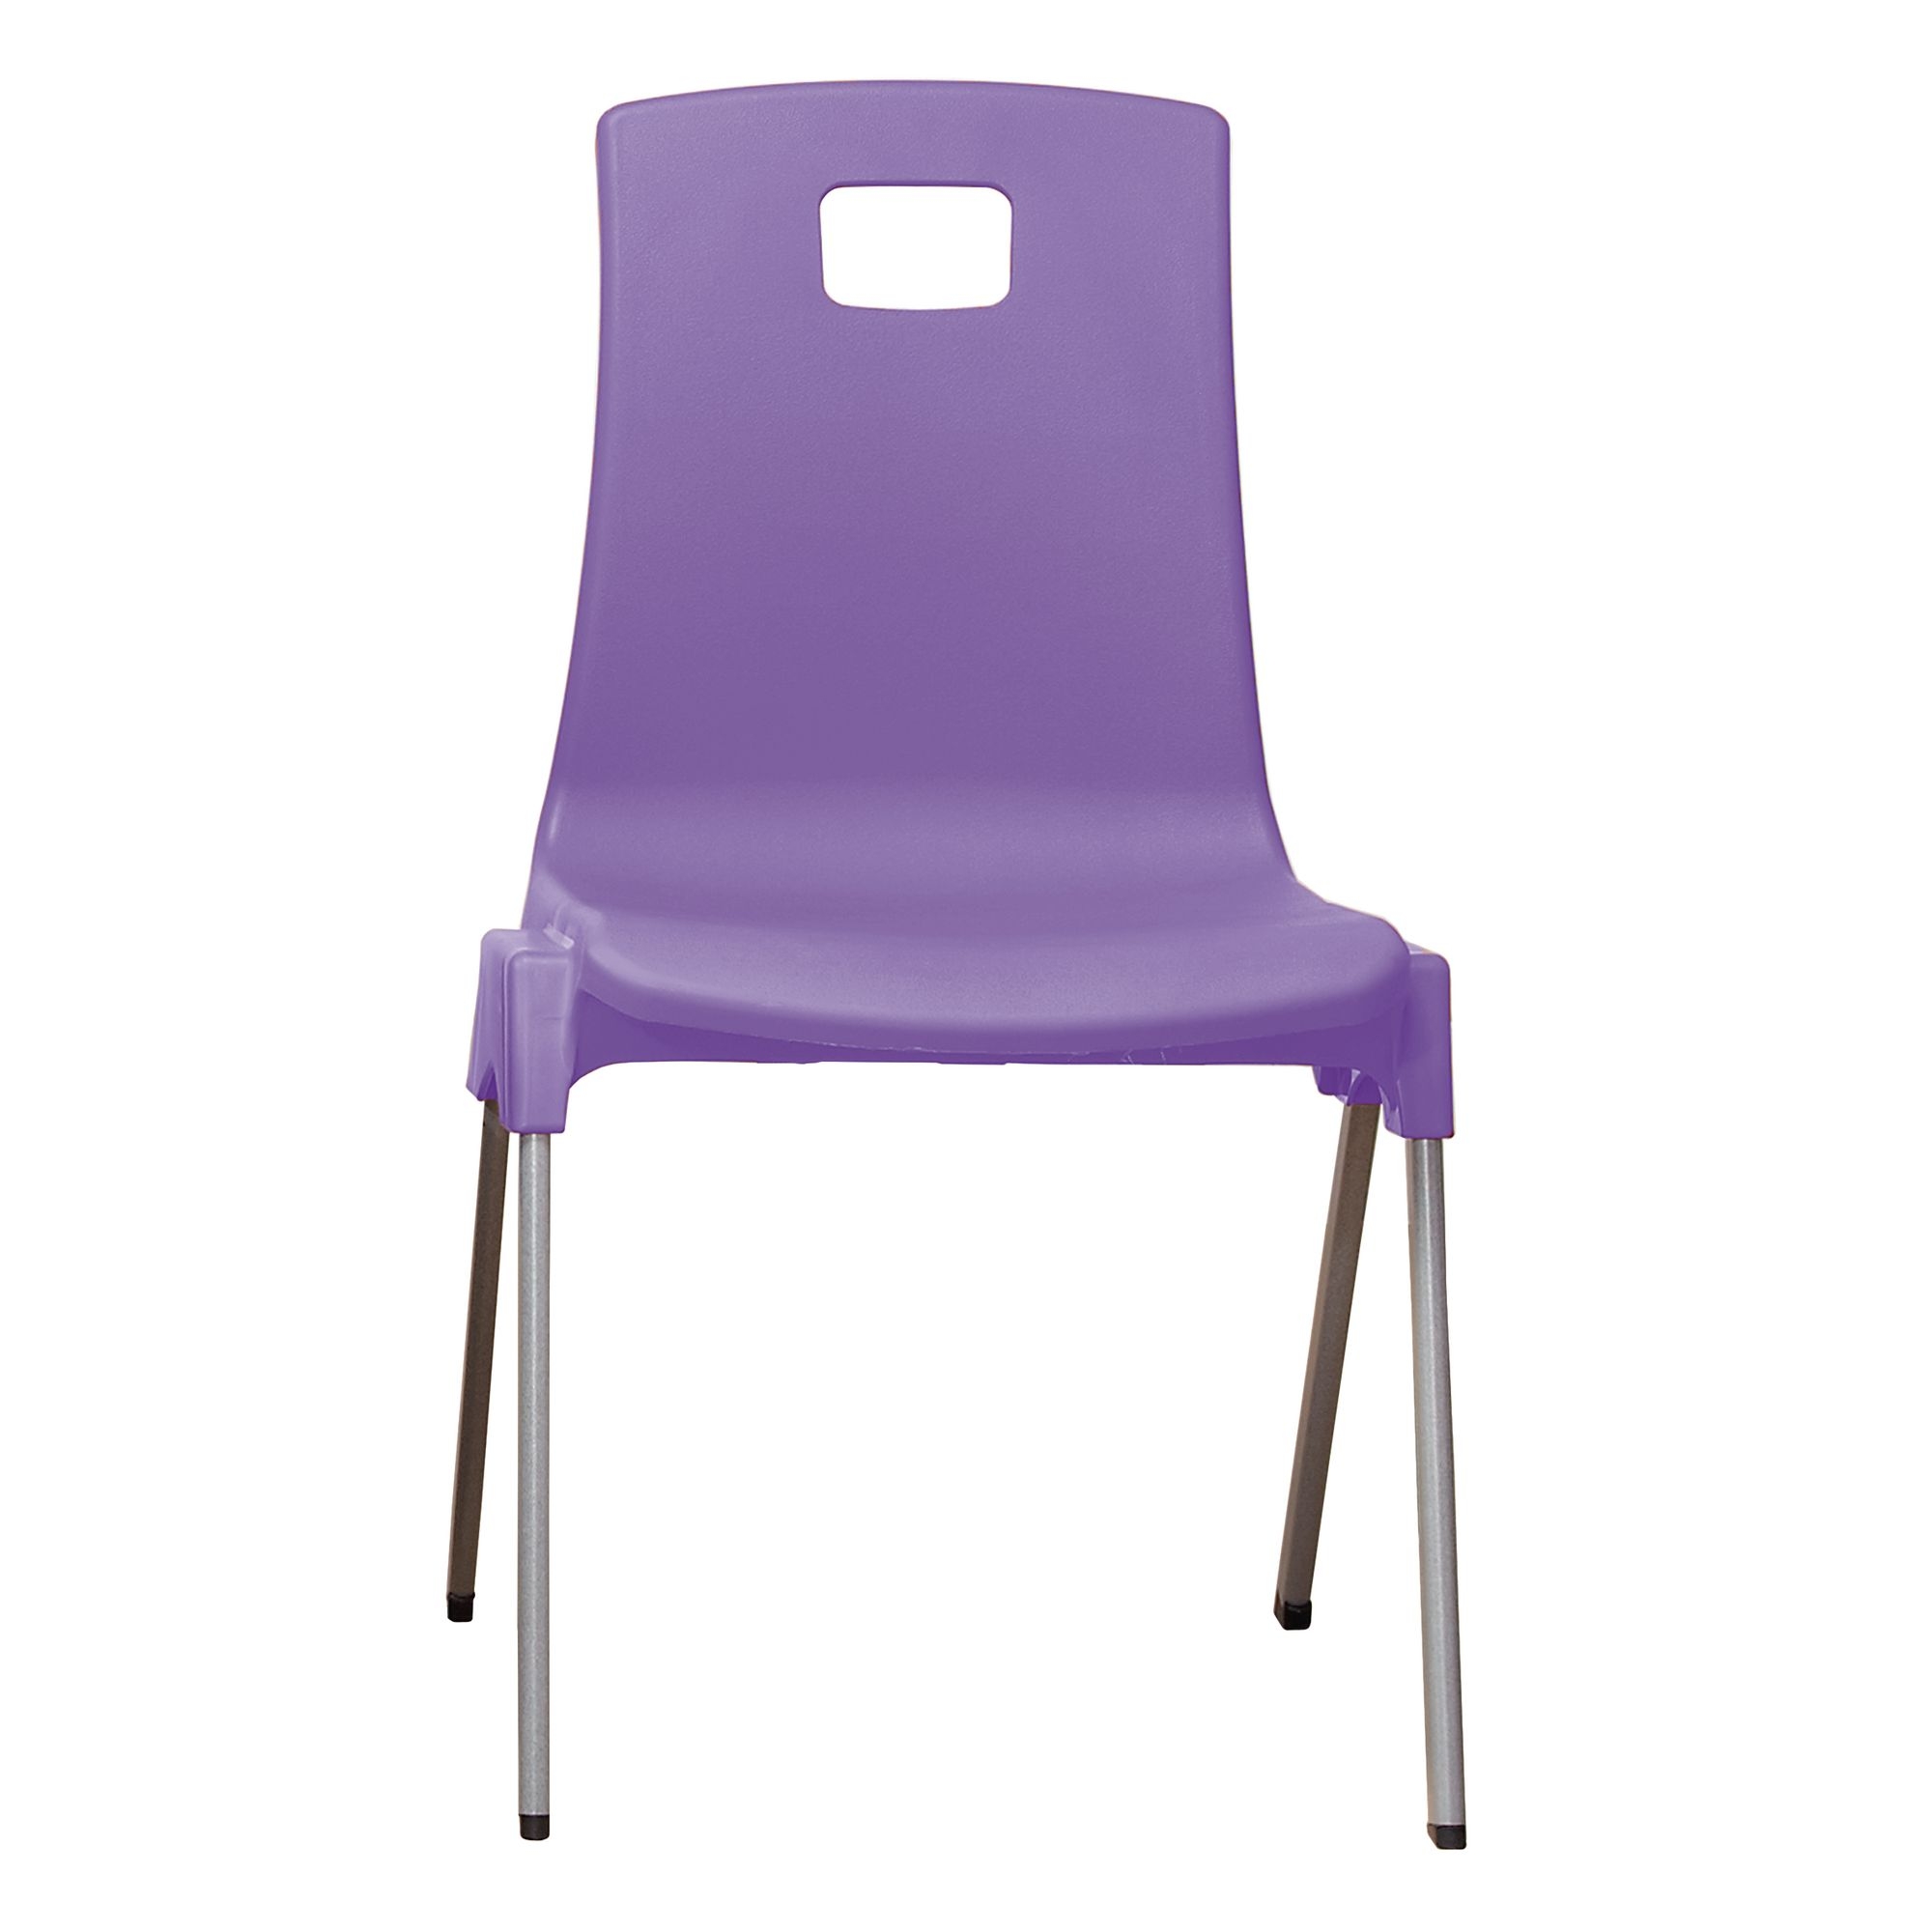 ST Chair - Size C - 350mm- Lilac